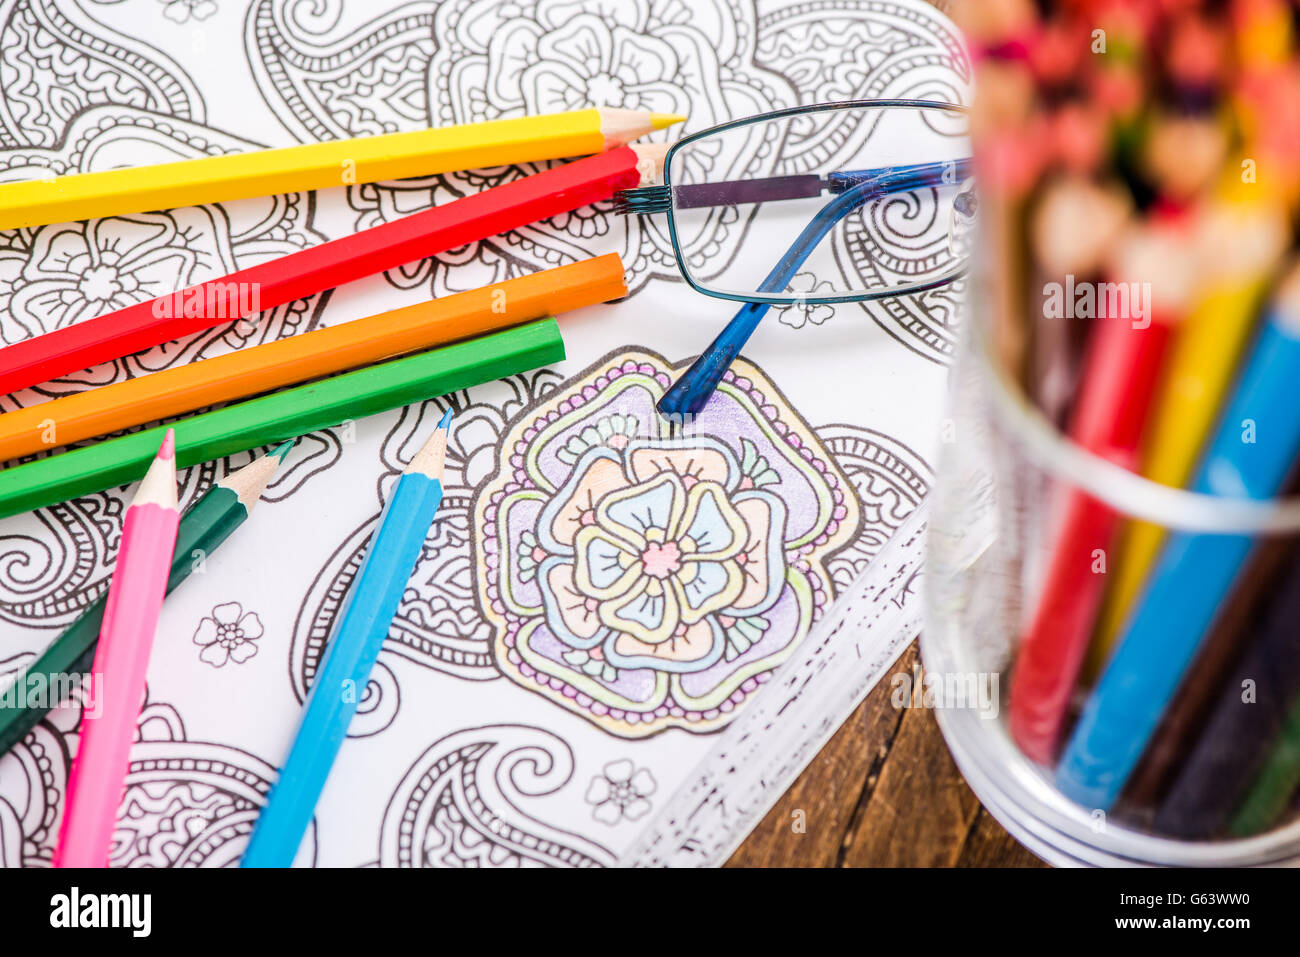 relaxing with adult coloring book, on wooden table Stock Photo